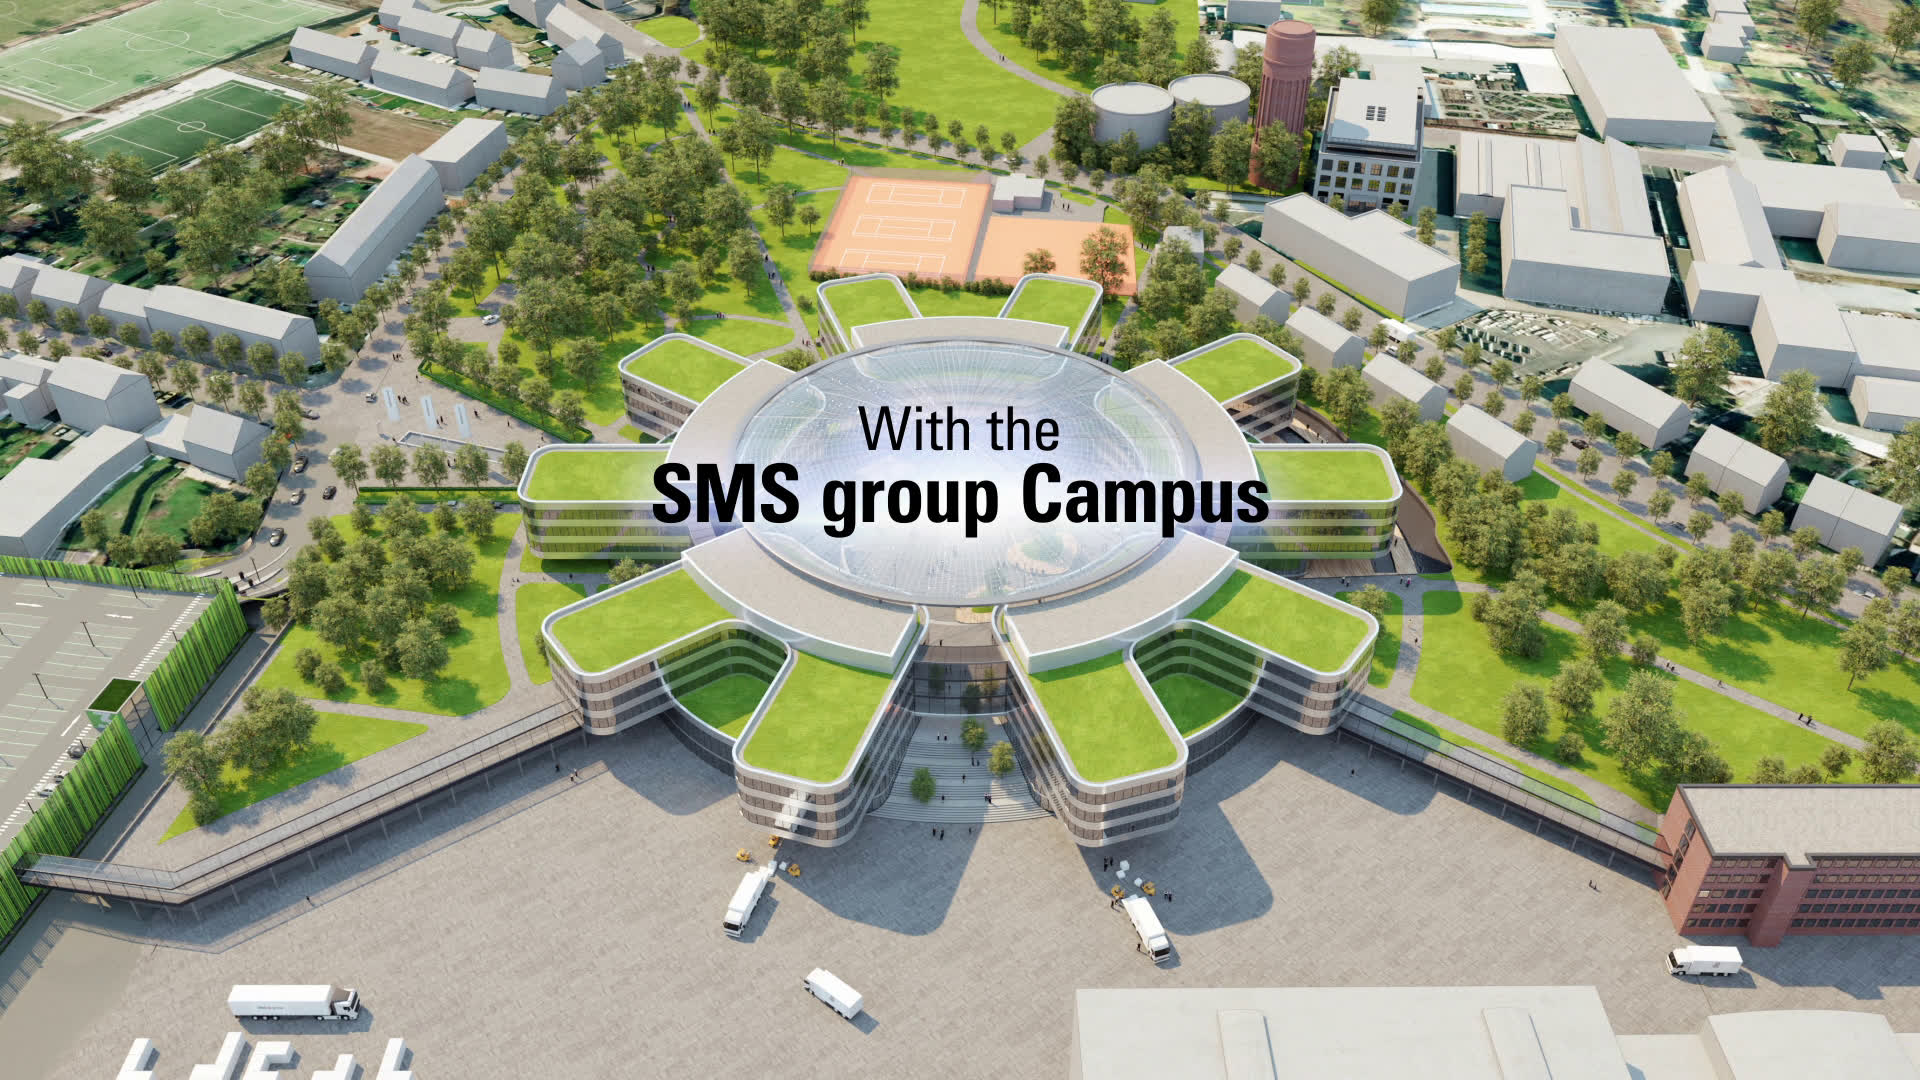 Groundbreaking ceremony at the SMS group campus